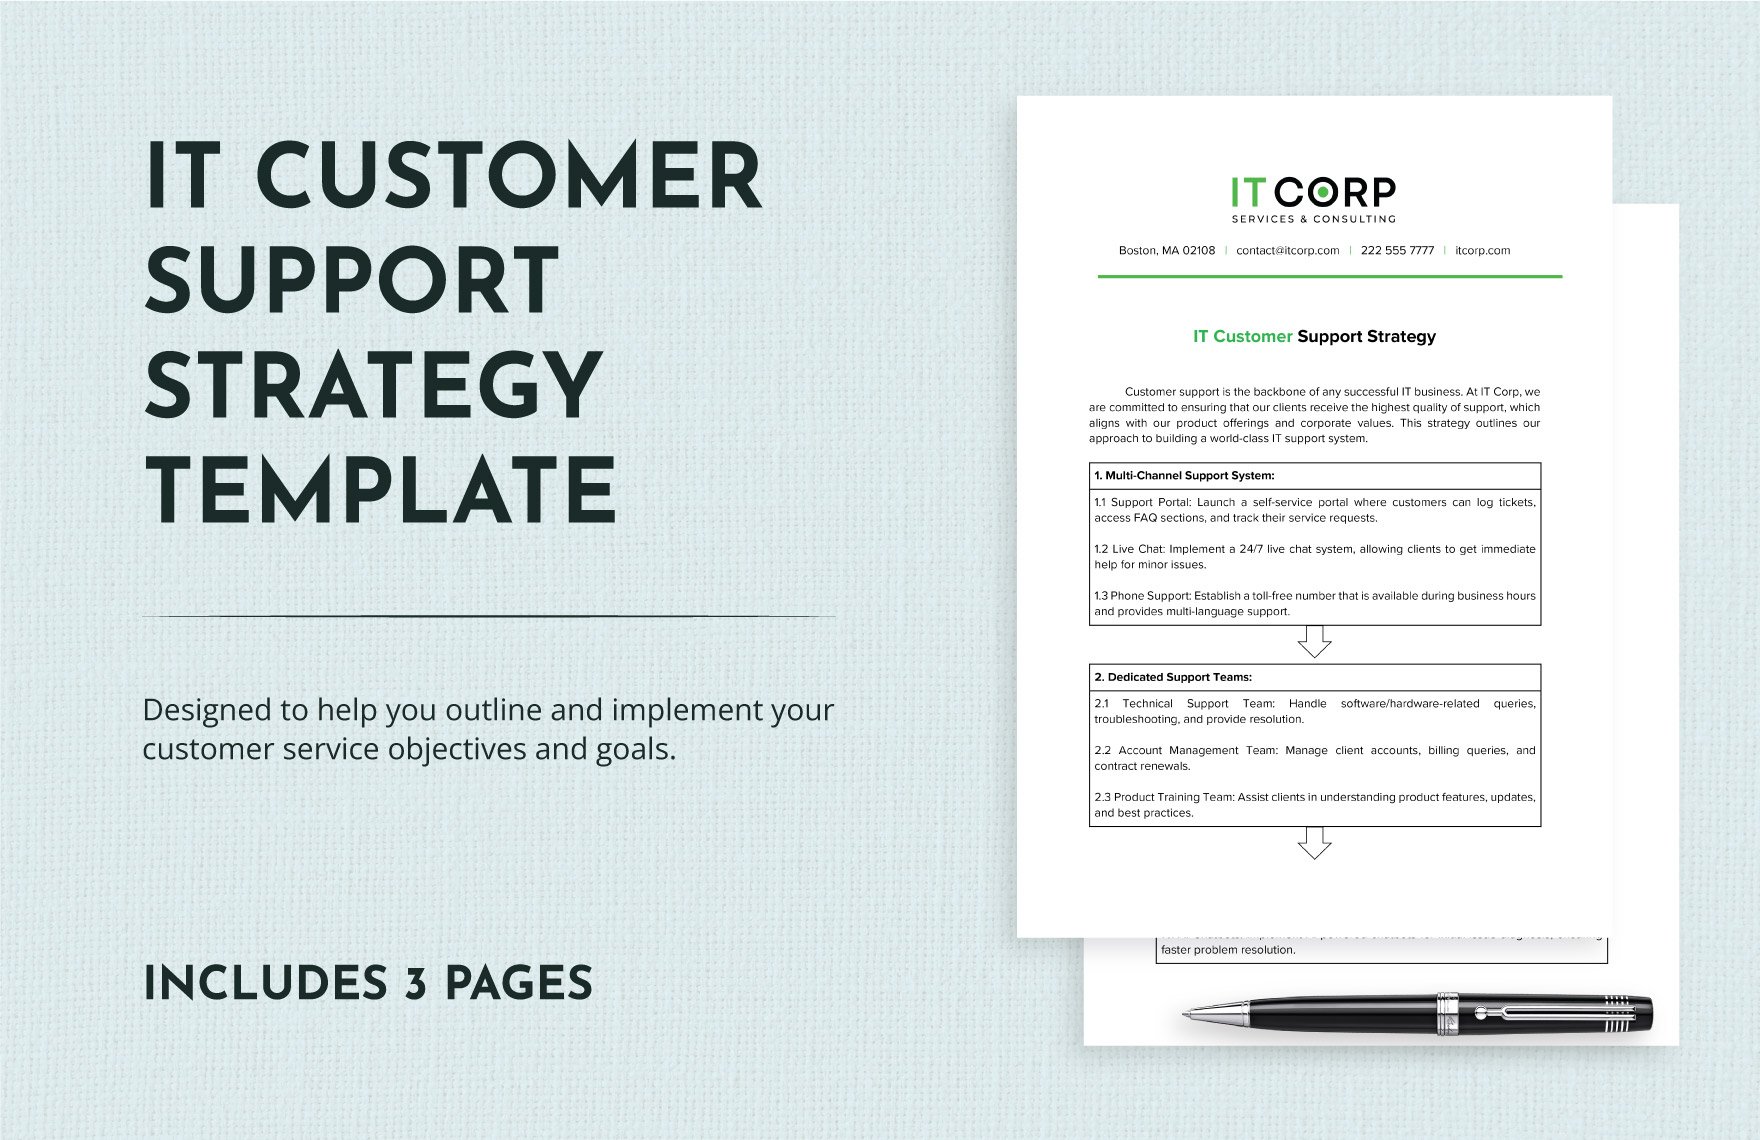 IT Customer Support Strategy Template